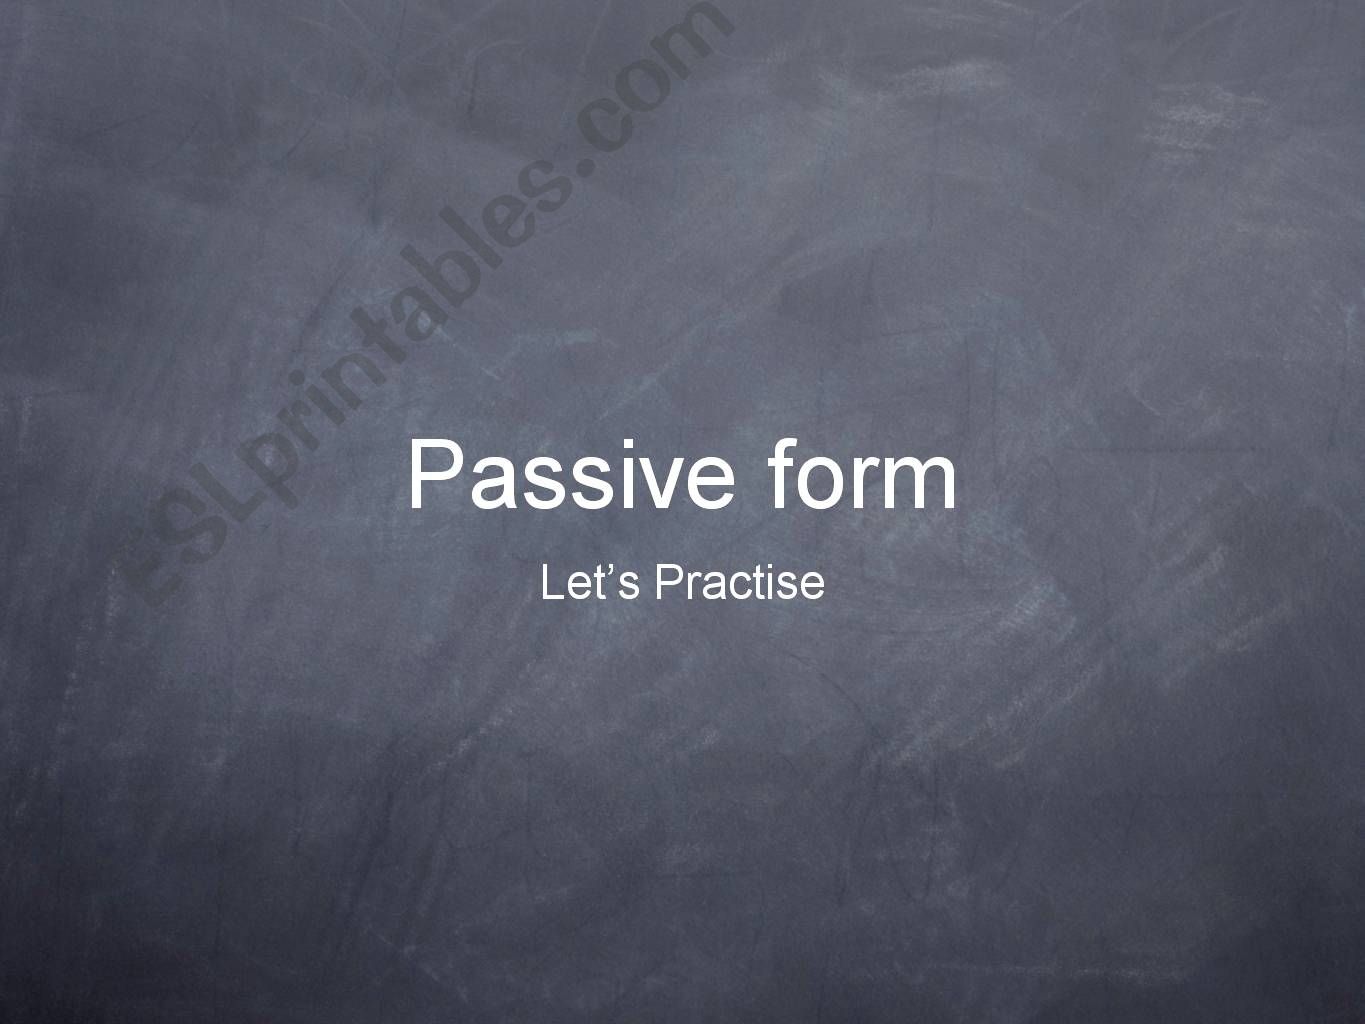 Lets practise the passive voice